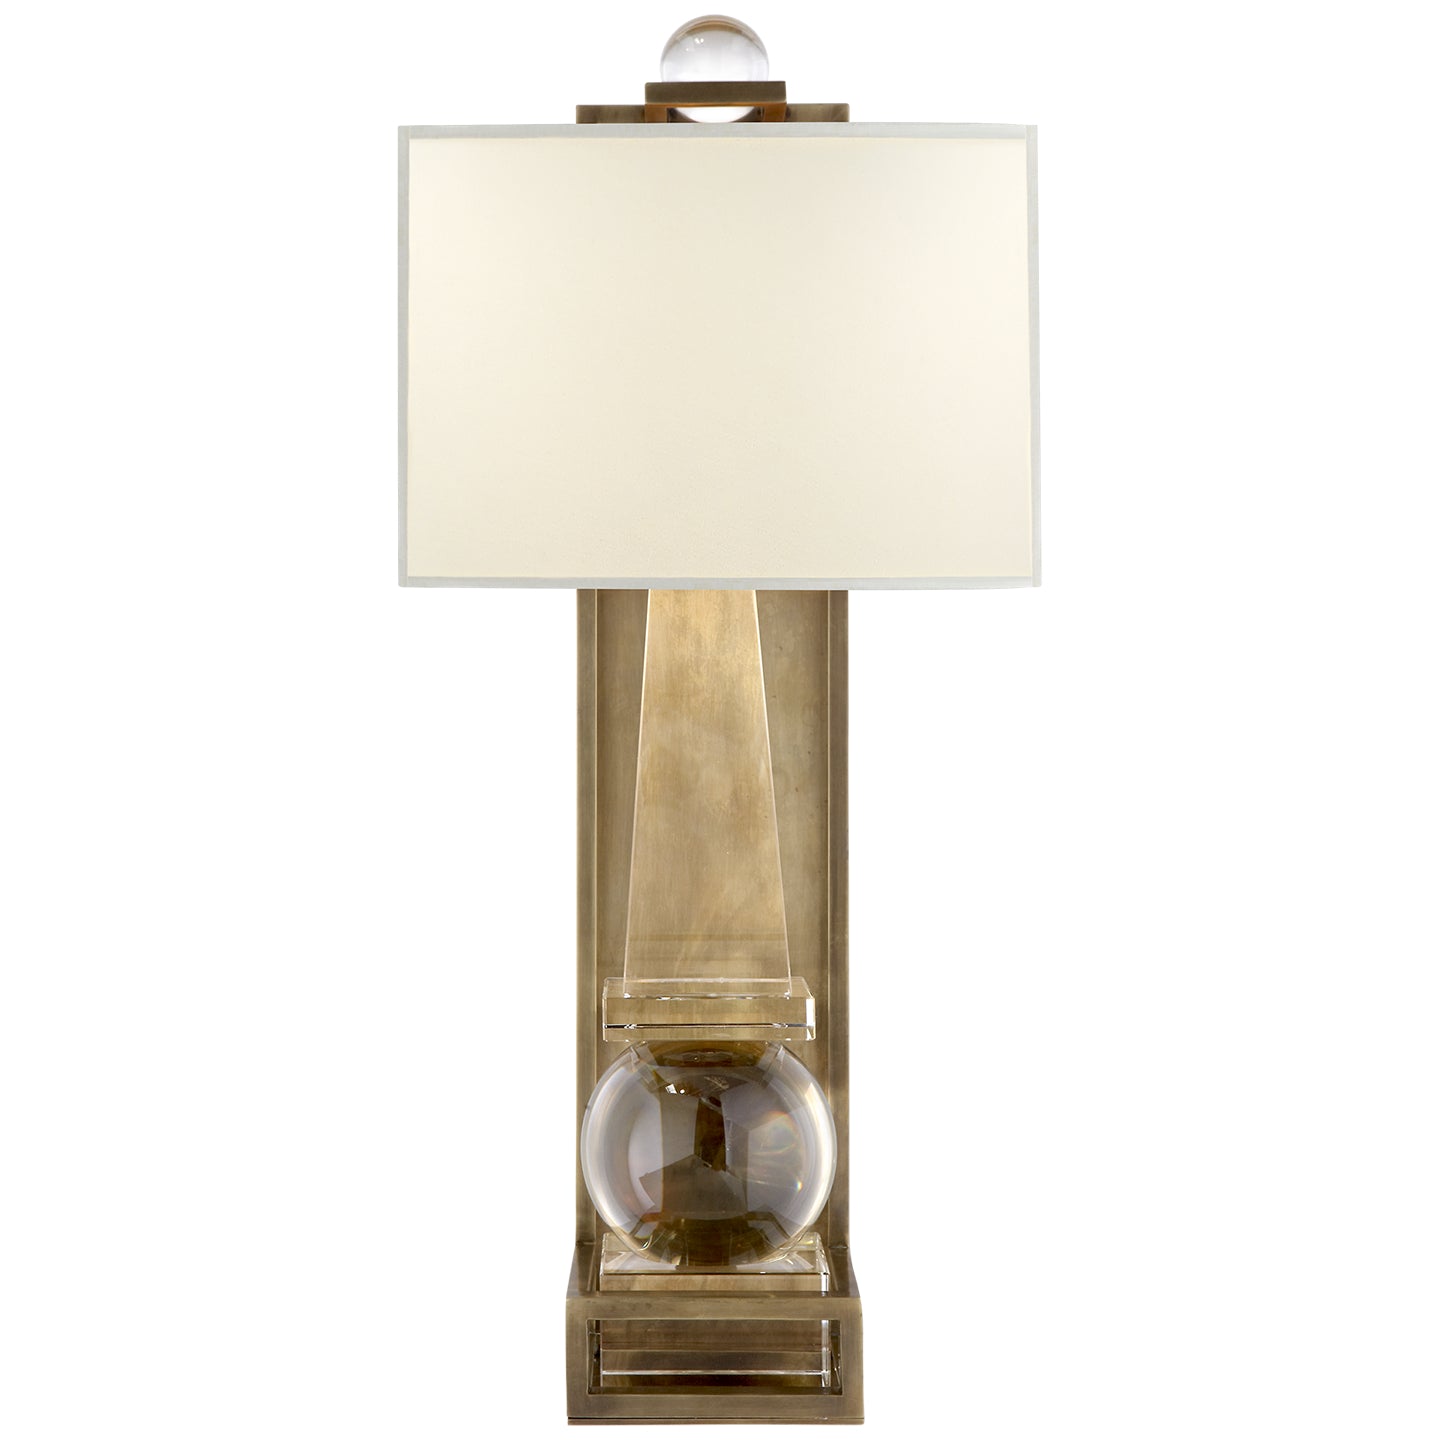 Visual Comfort Signature - CHD 2262CG/AB-PL - One Light Wall Sconce - Paladin - Crystal with Brass